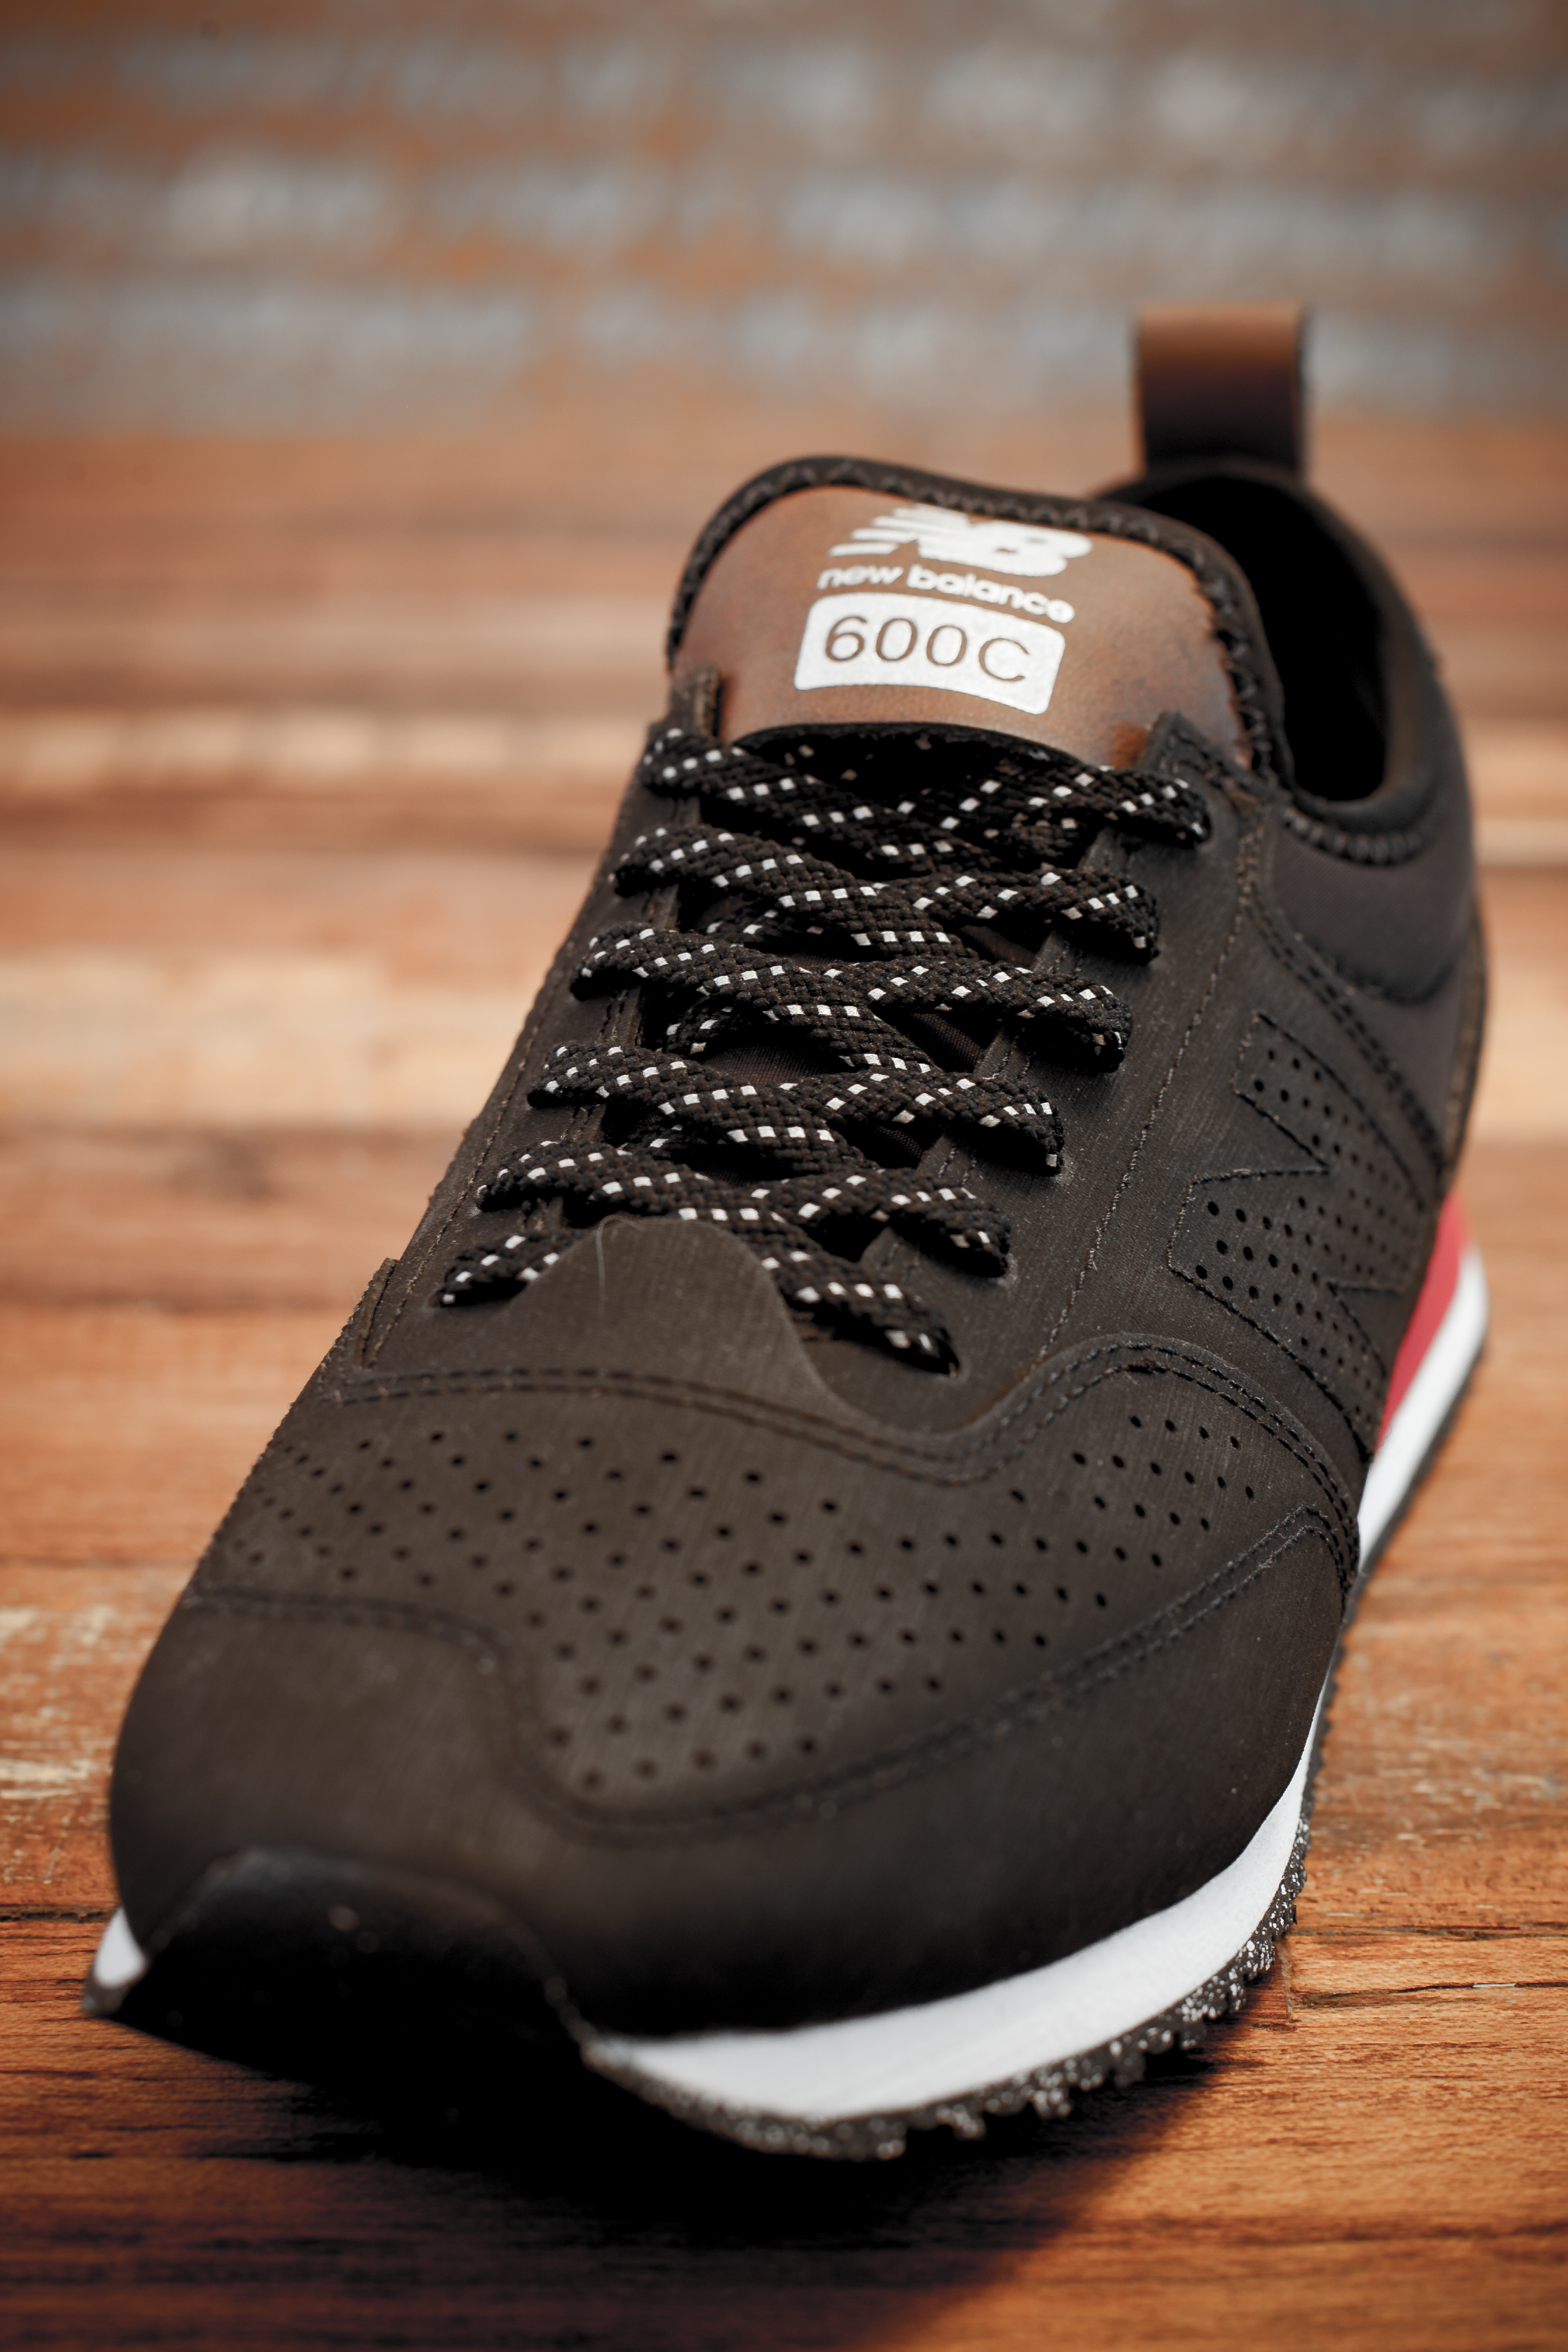 New Balance 600 C-Series — life is a 